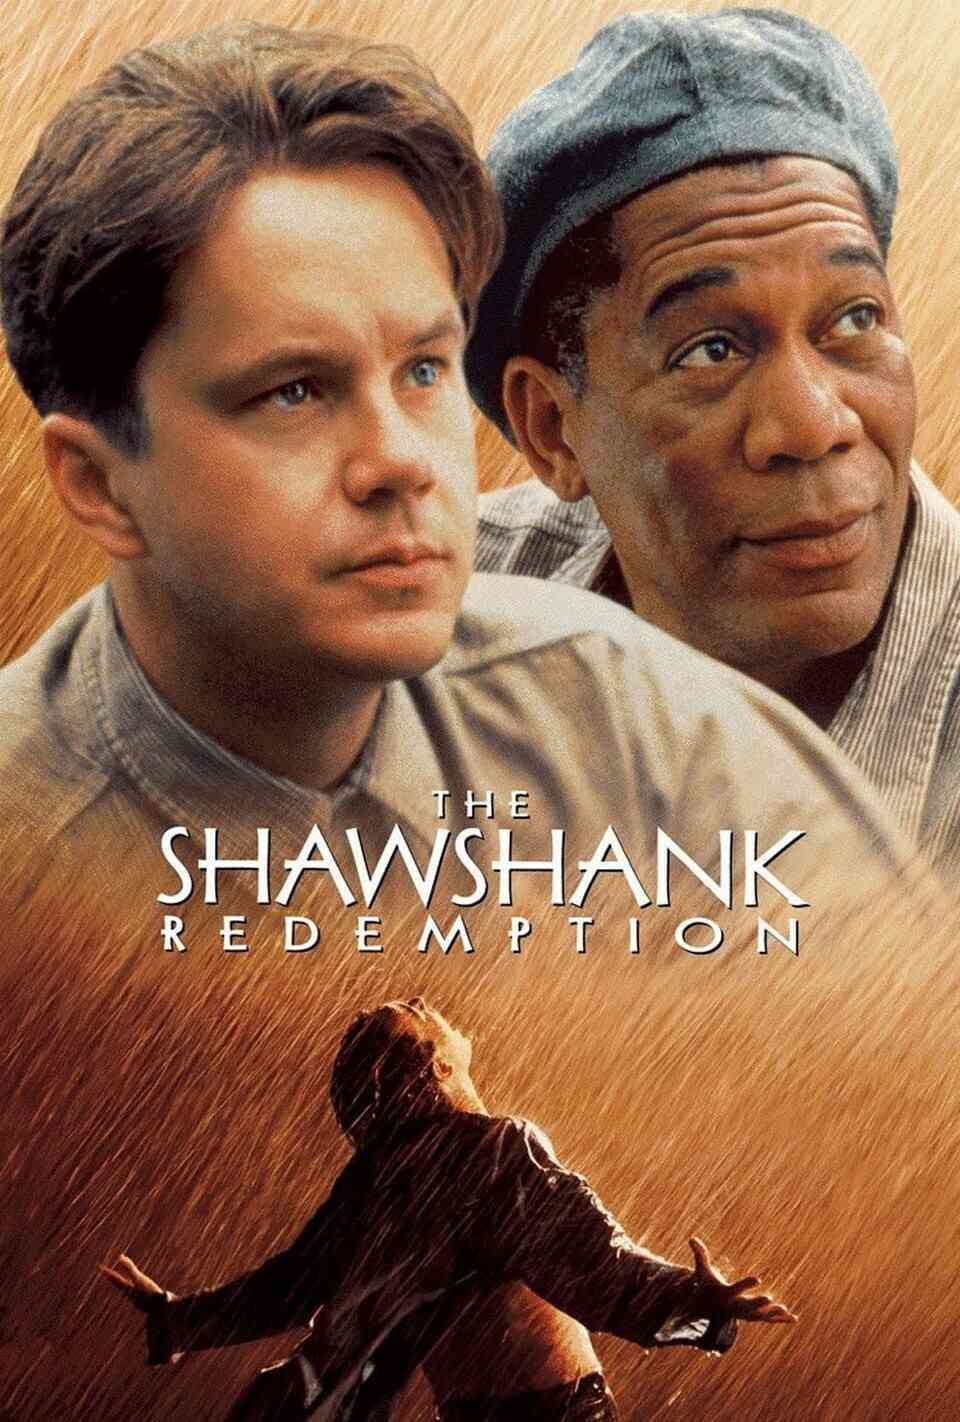 Read The Shawshank Redemption screenplay (poster)